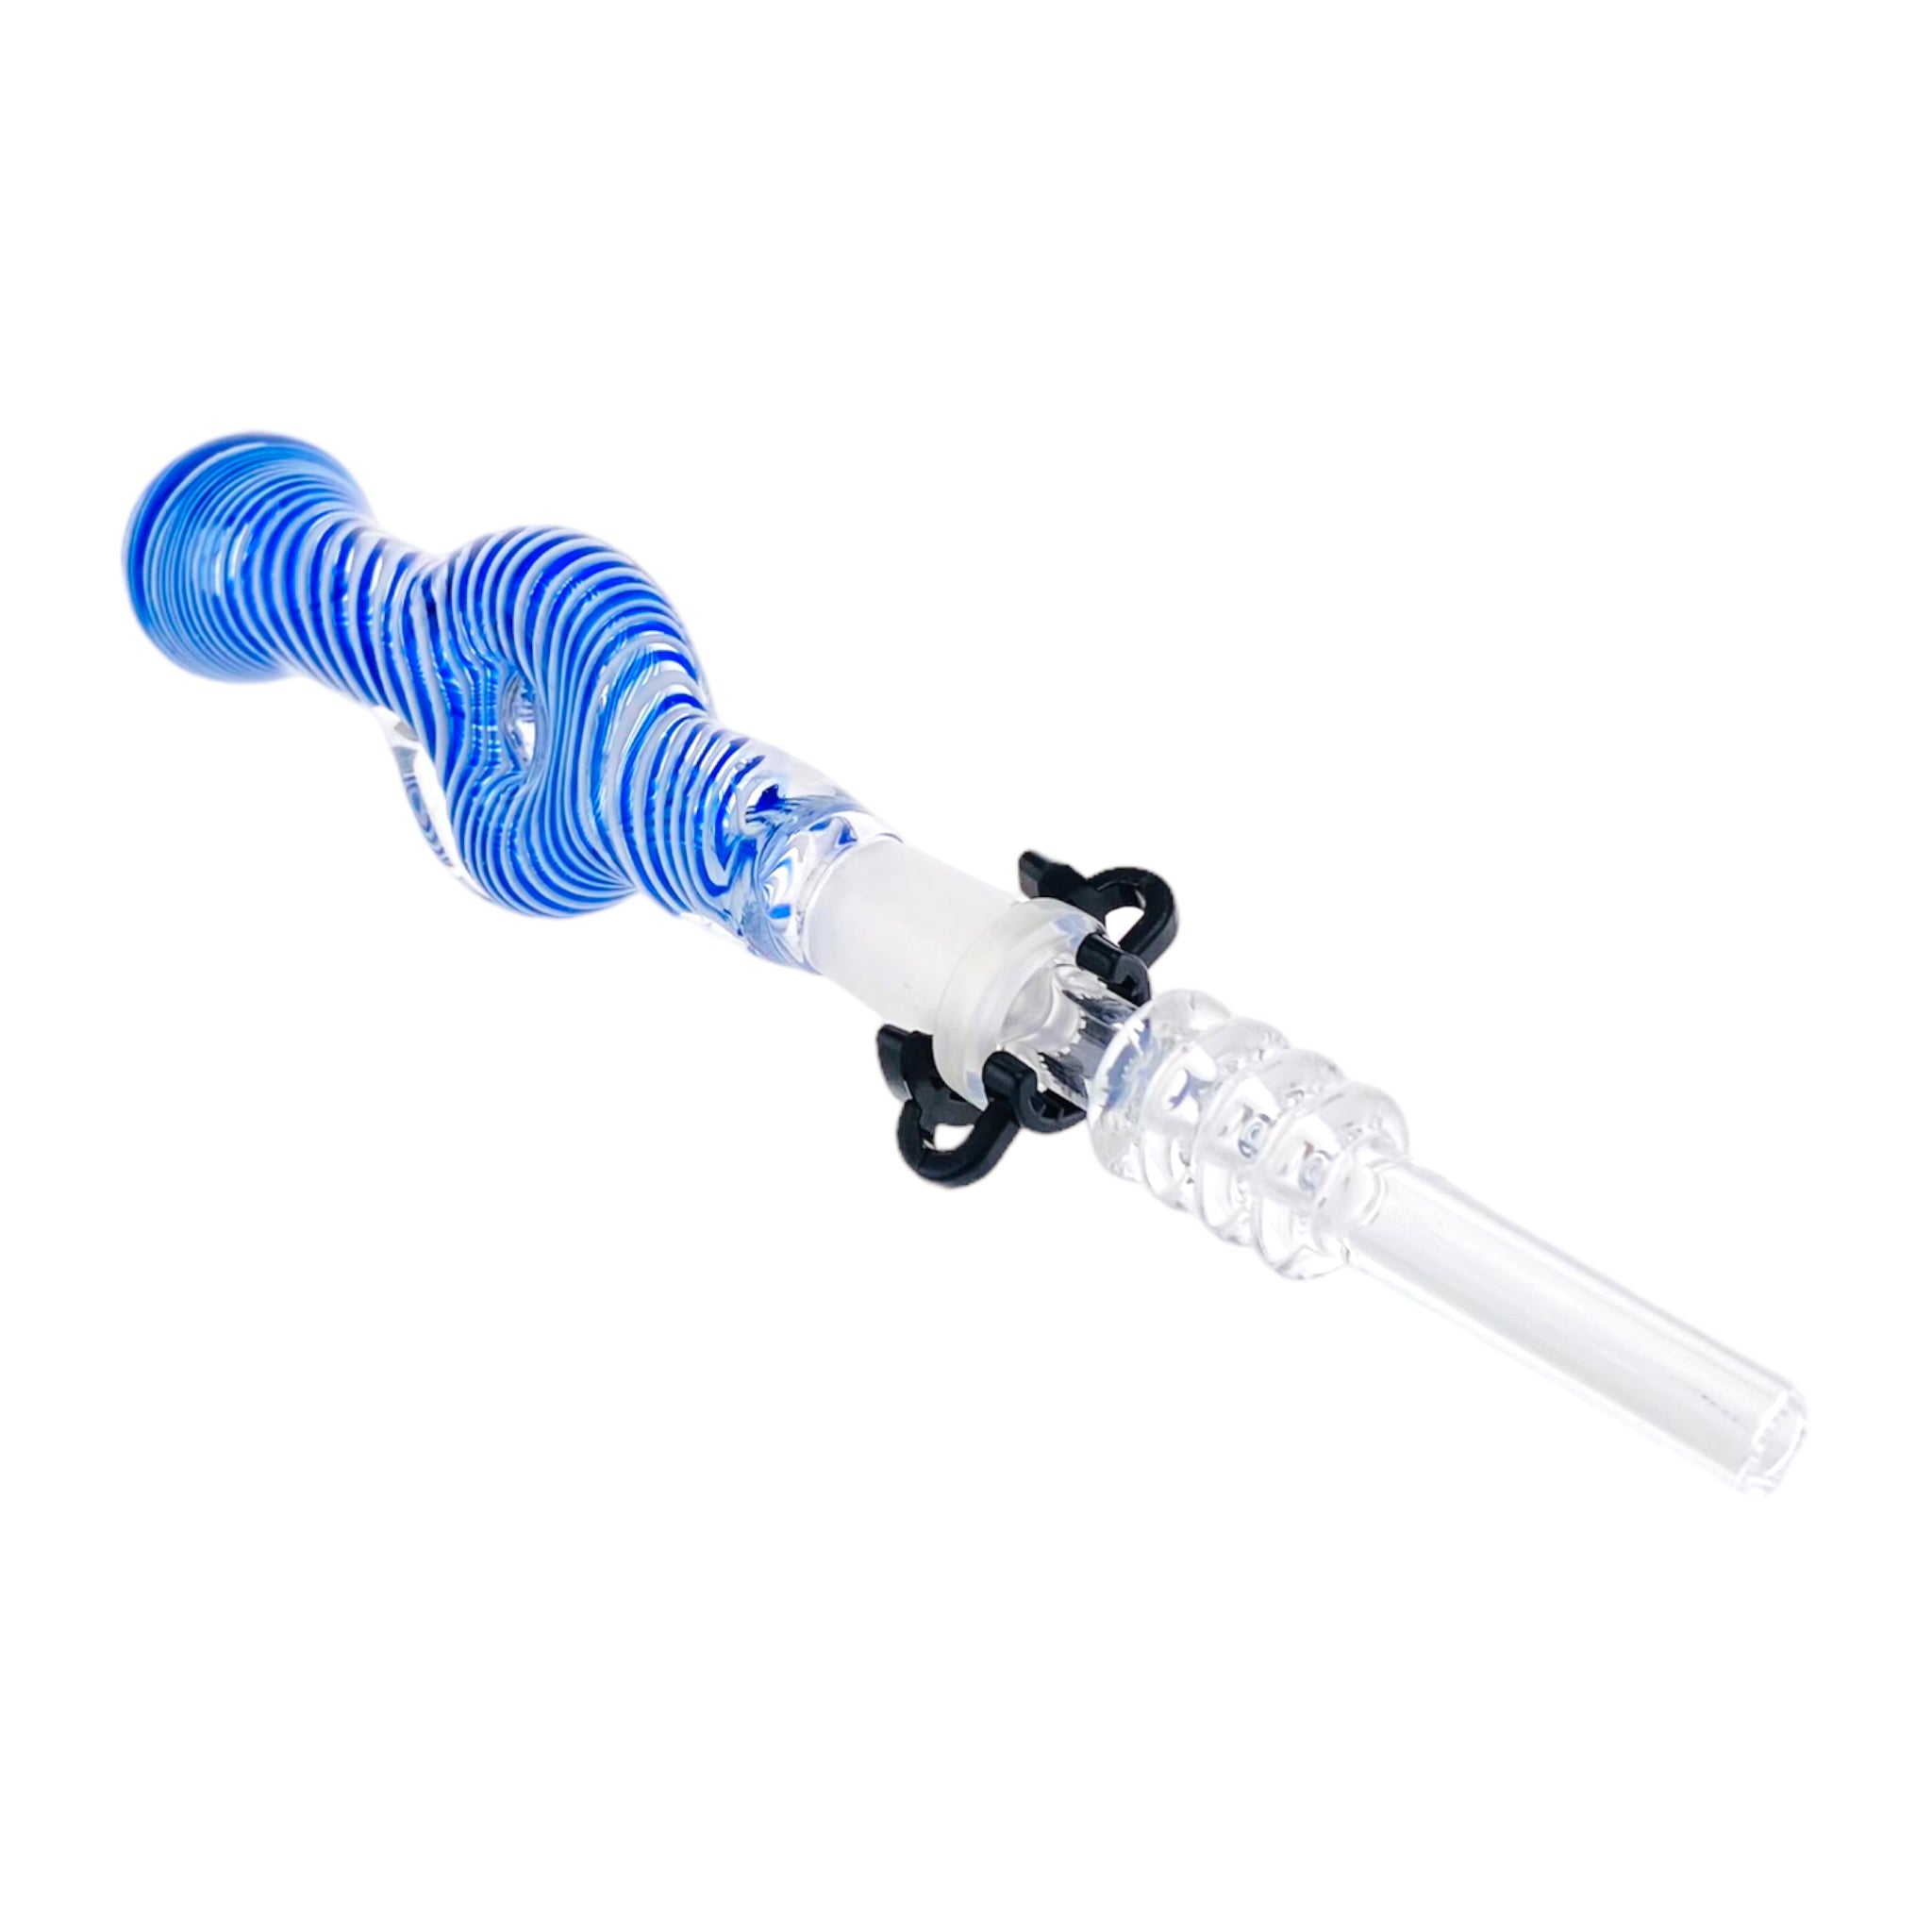 Nectar Collector Dab Straw Monster